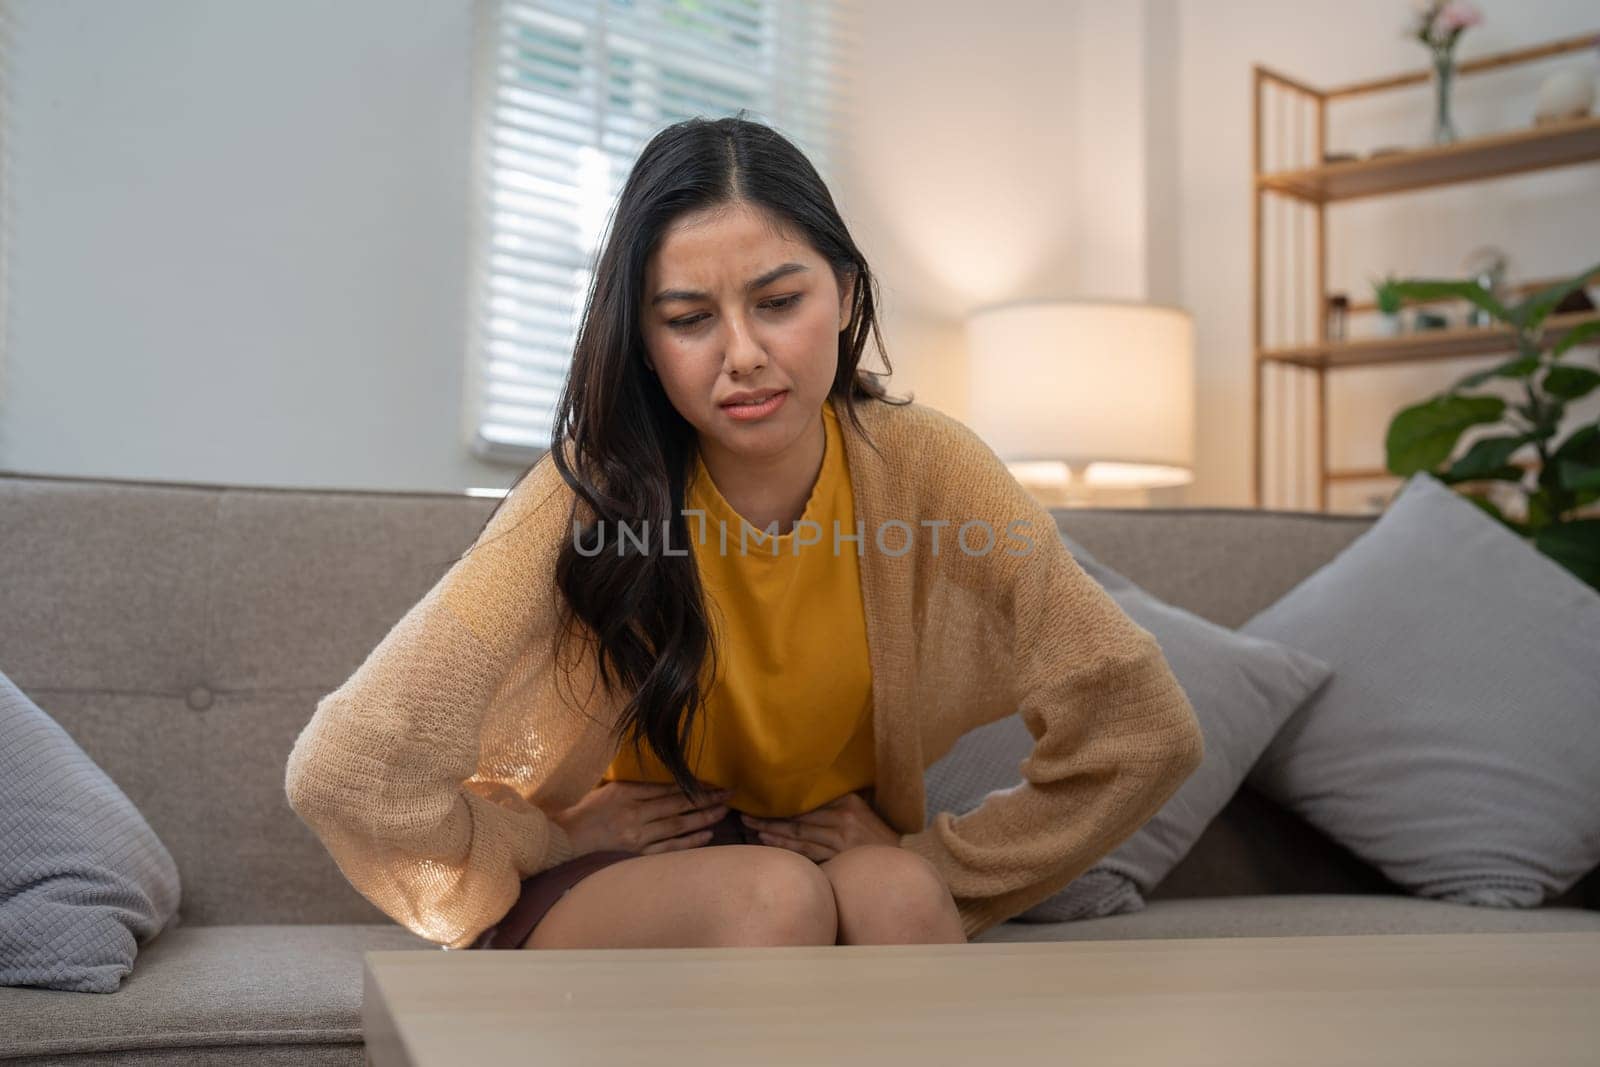 A young woman sitting on a couch appears to be in discomfort, clutching her stomach with a concerned expression